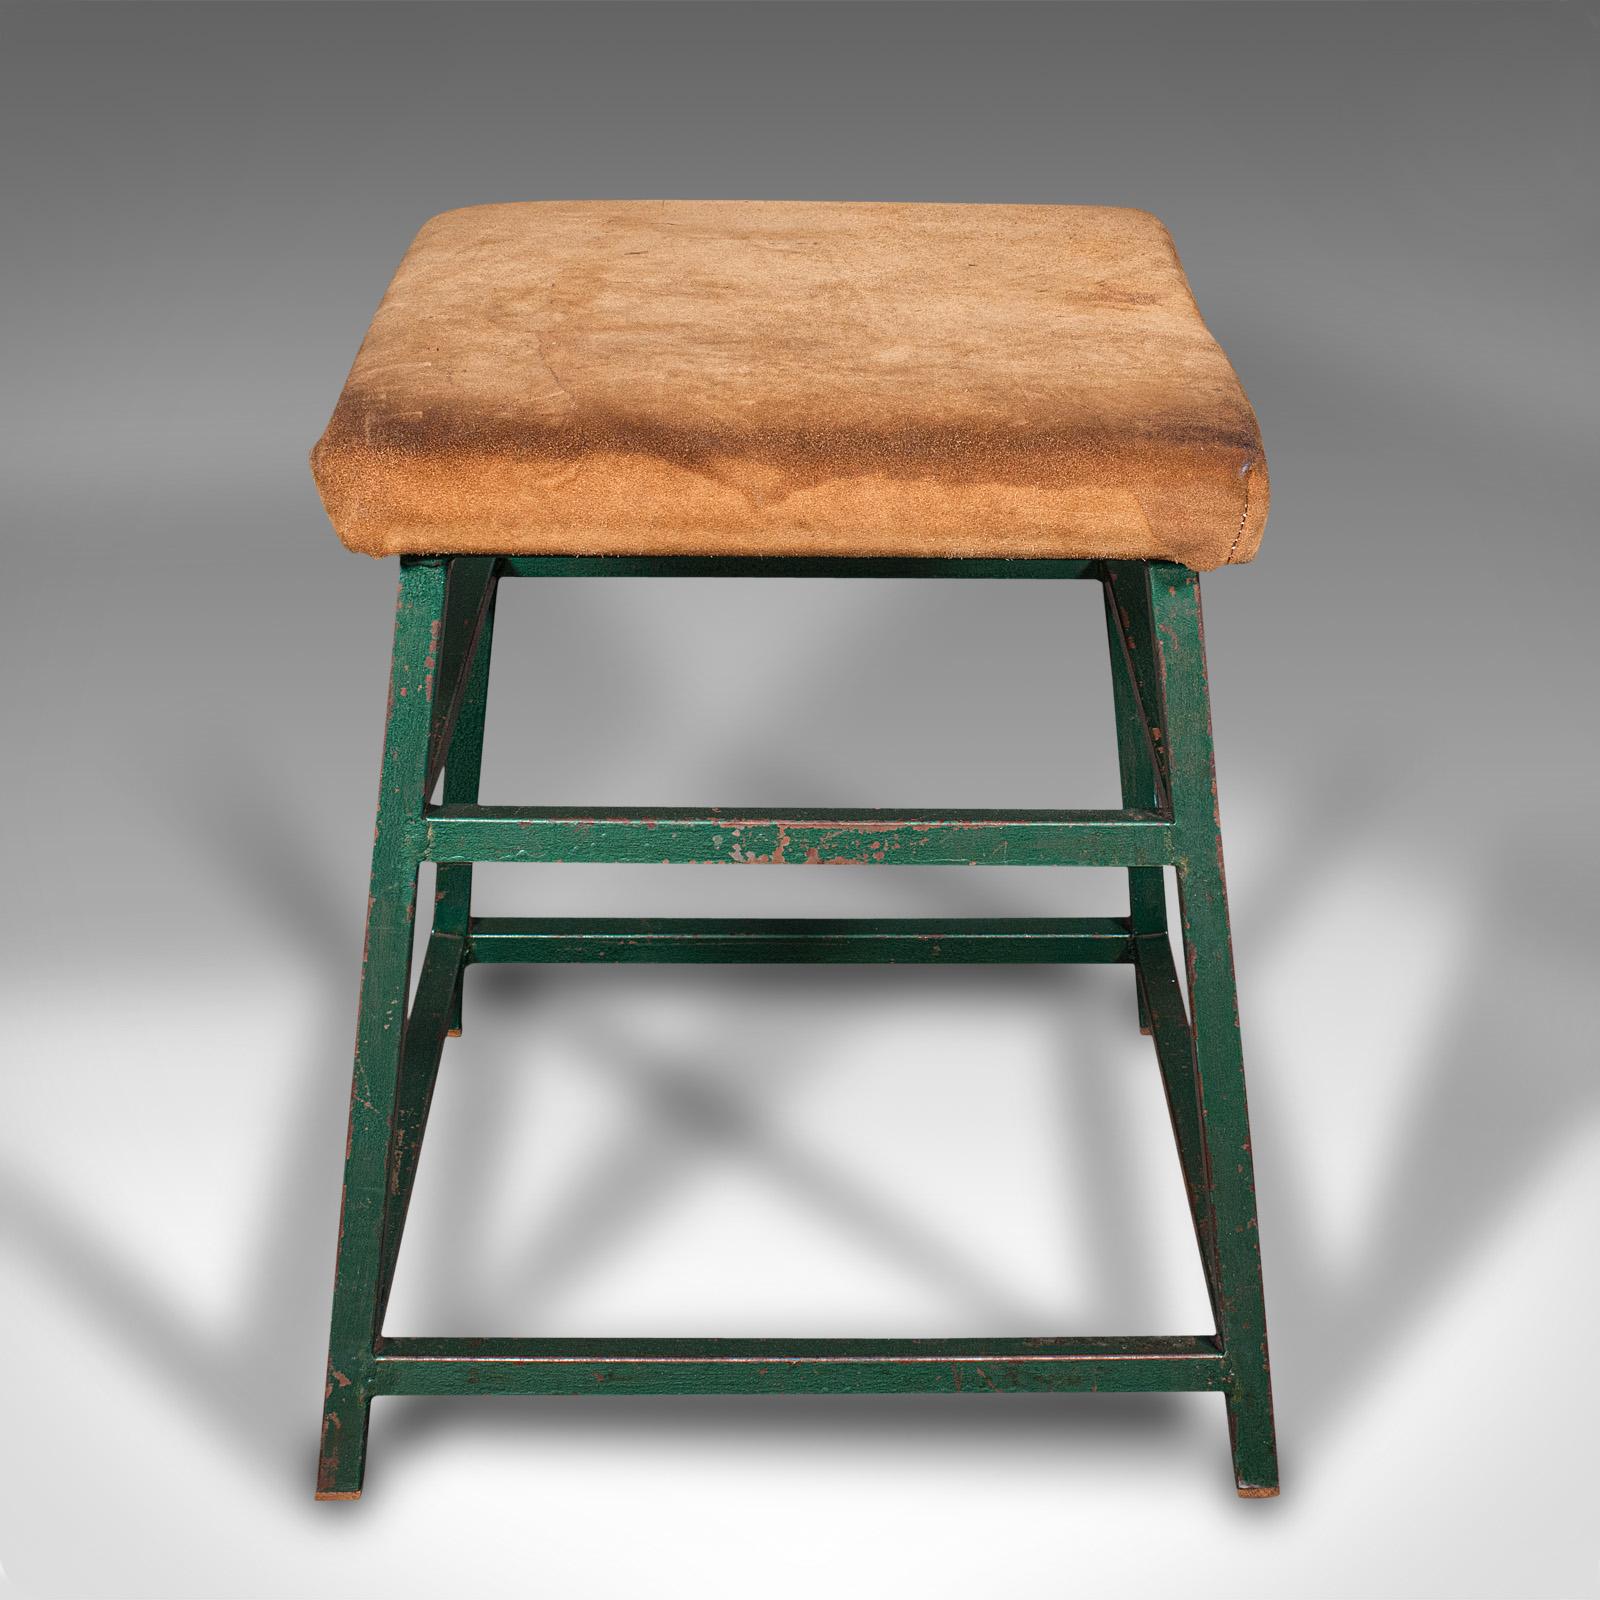 This is a large vintage industrial lab stool. An English, suede and steel kitchen or office seat, dating to the mid 20th century, circa 1950.

Generously proportioned stool with an inherently versatile nature
Displays a desirable aged patina,